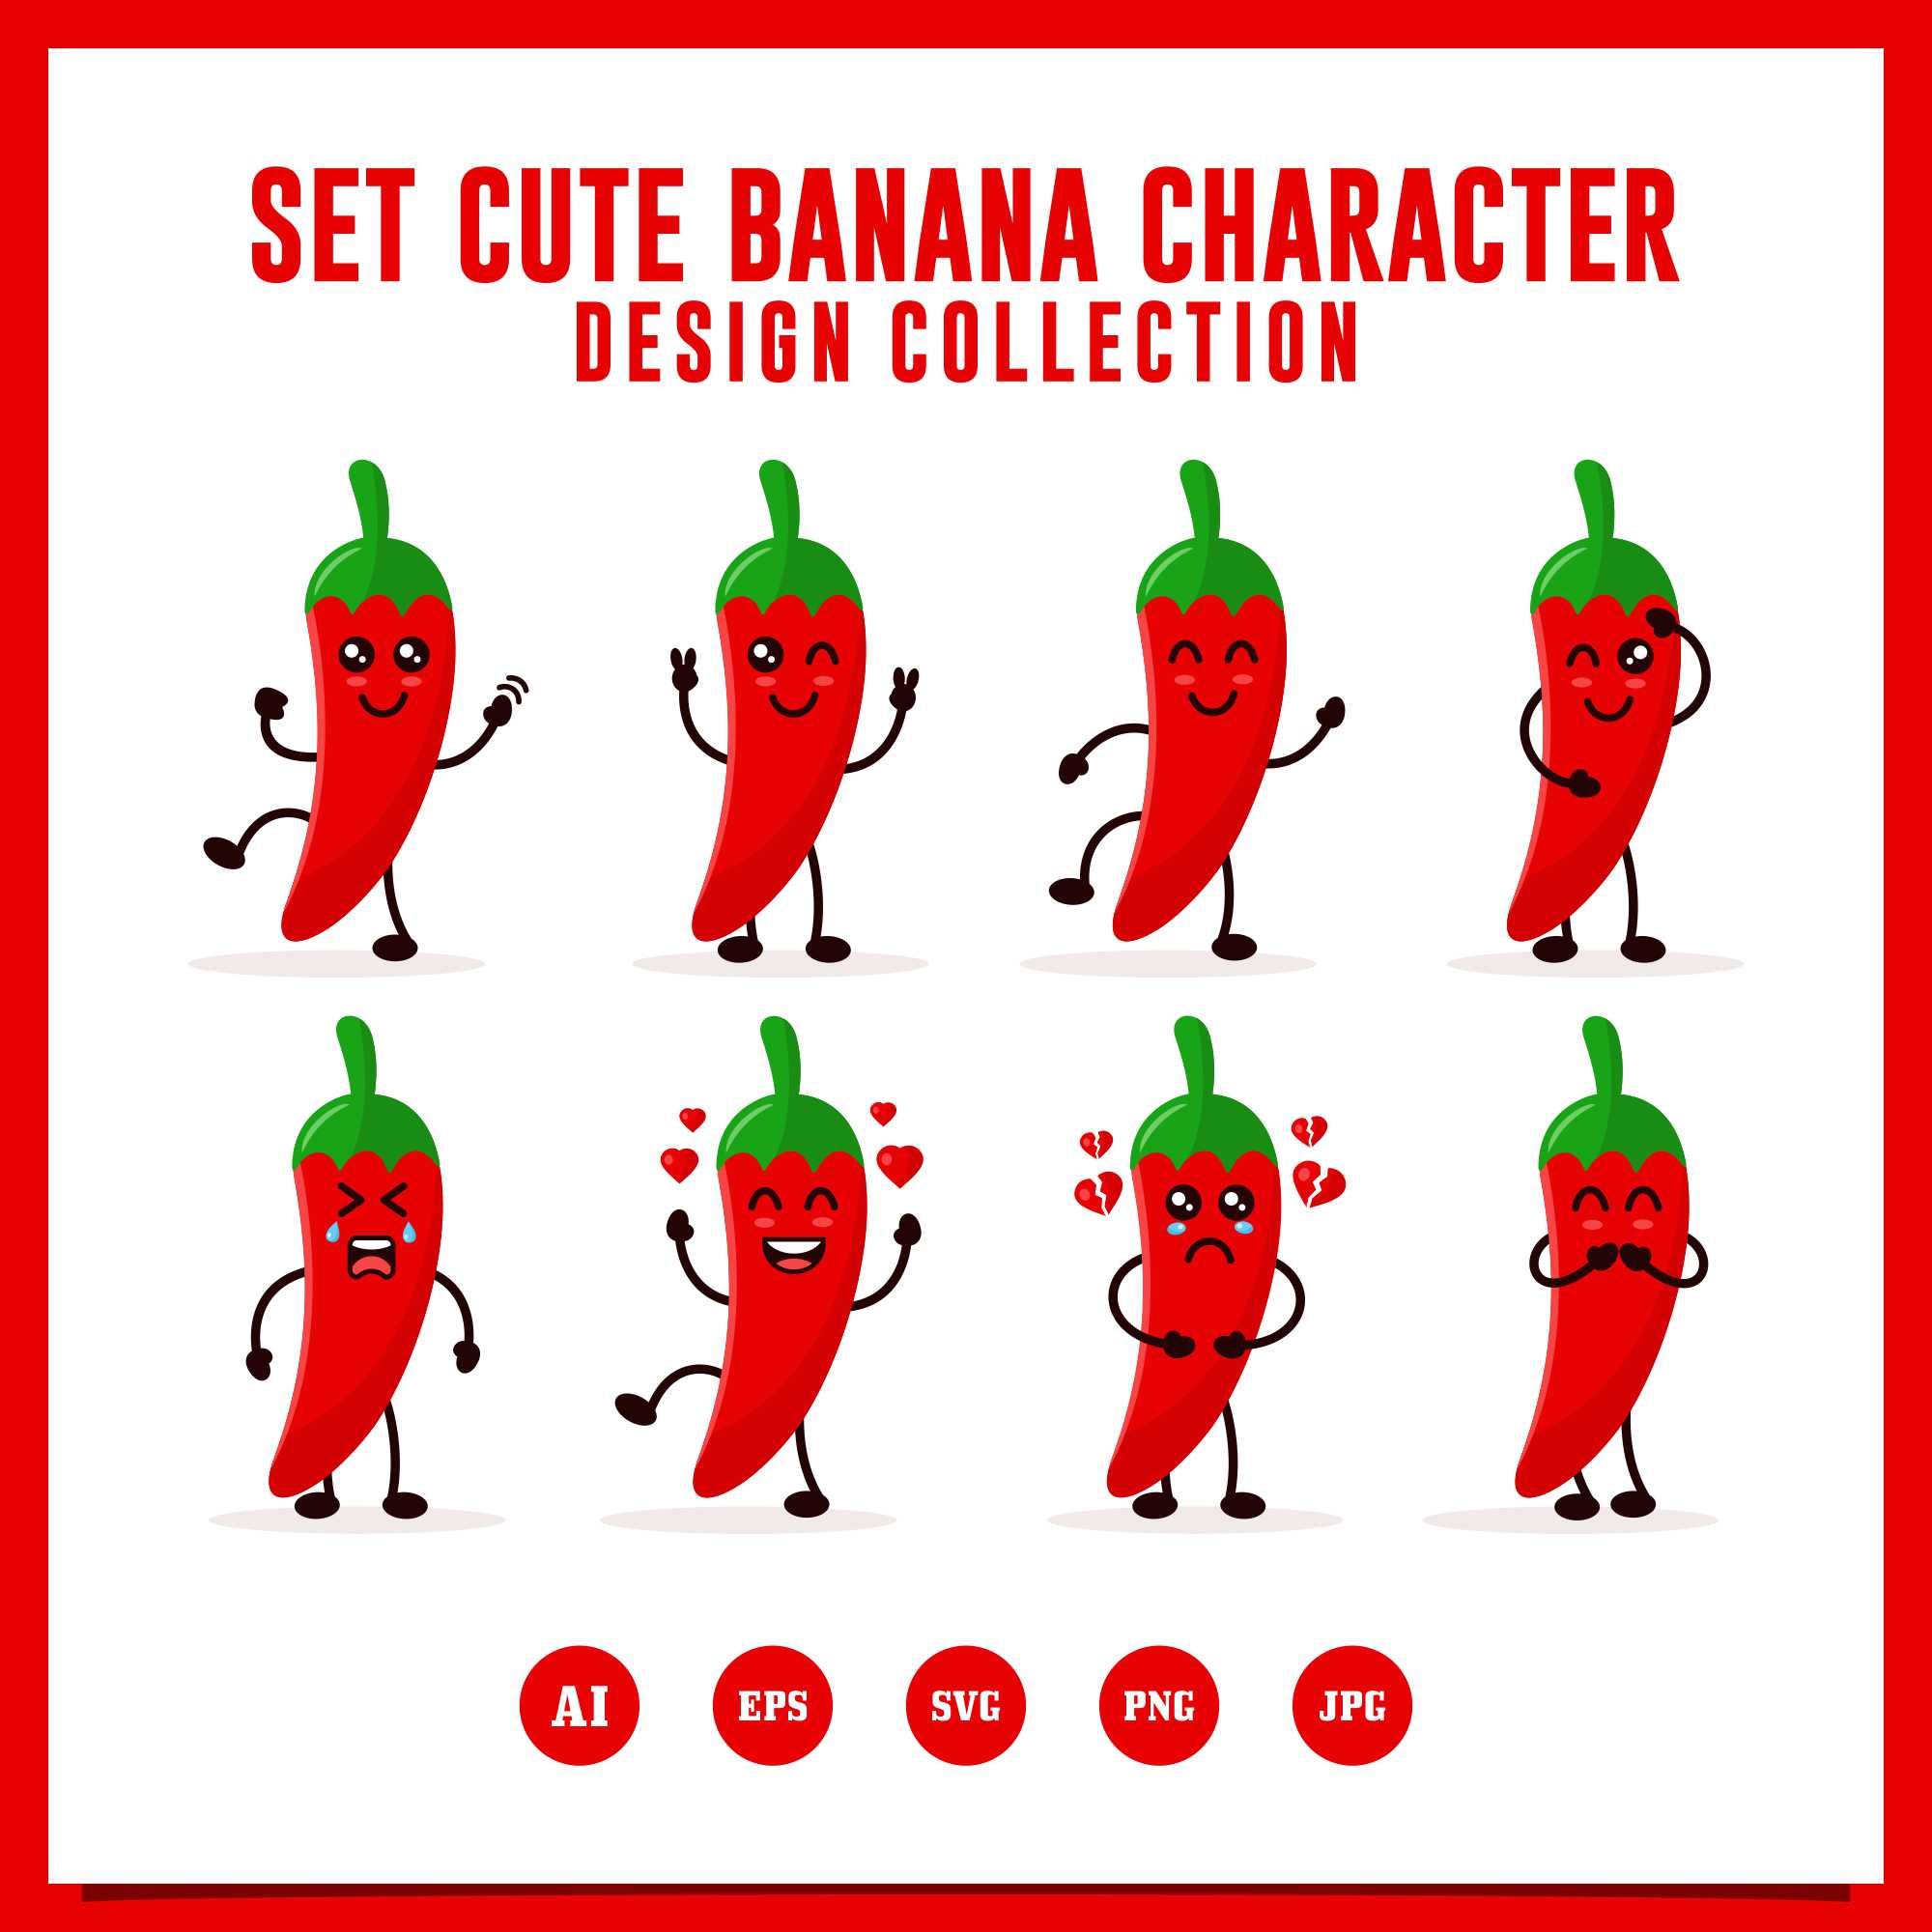 Set cute chili charater vector illustration - $4 cover image.